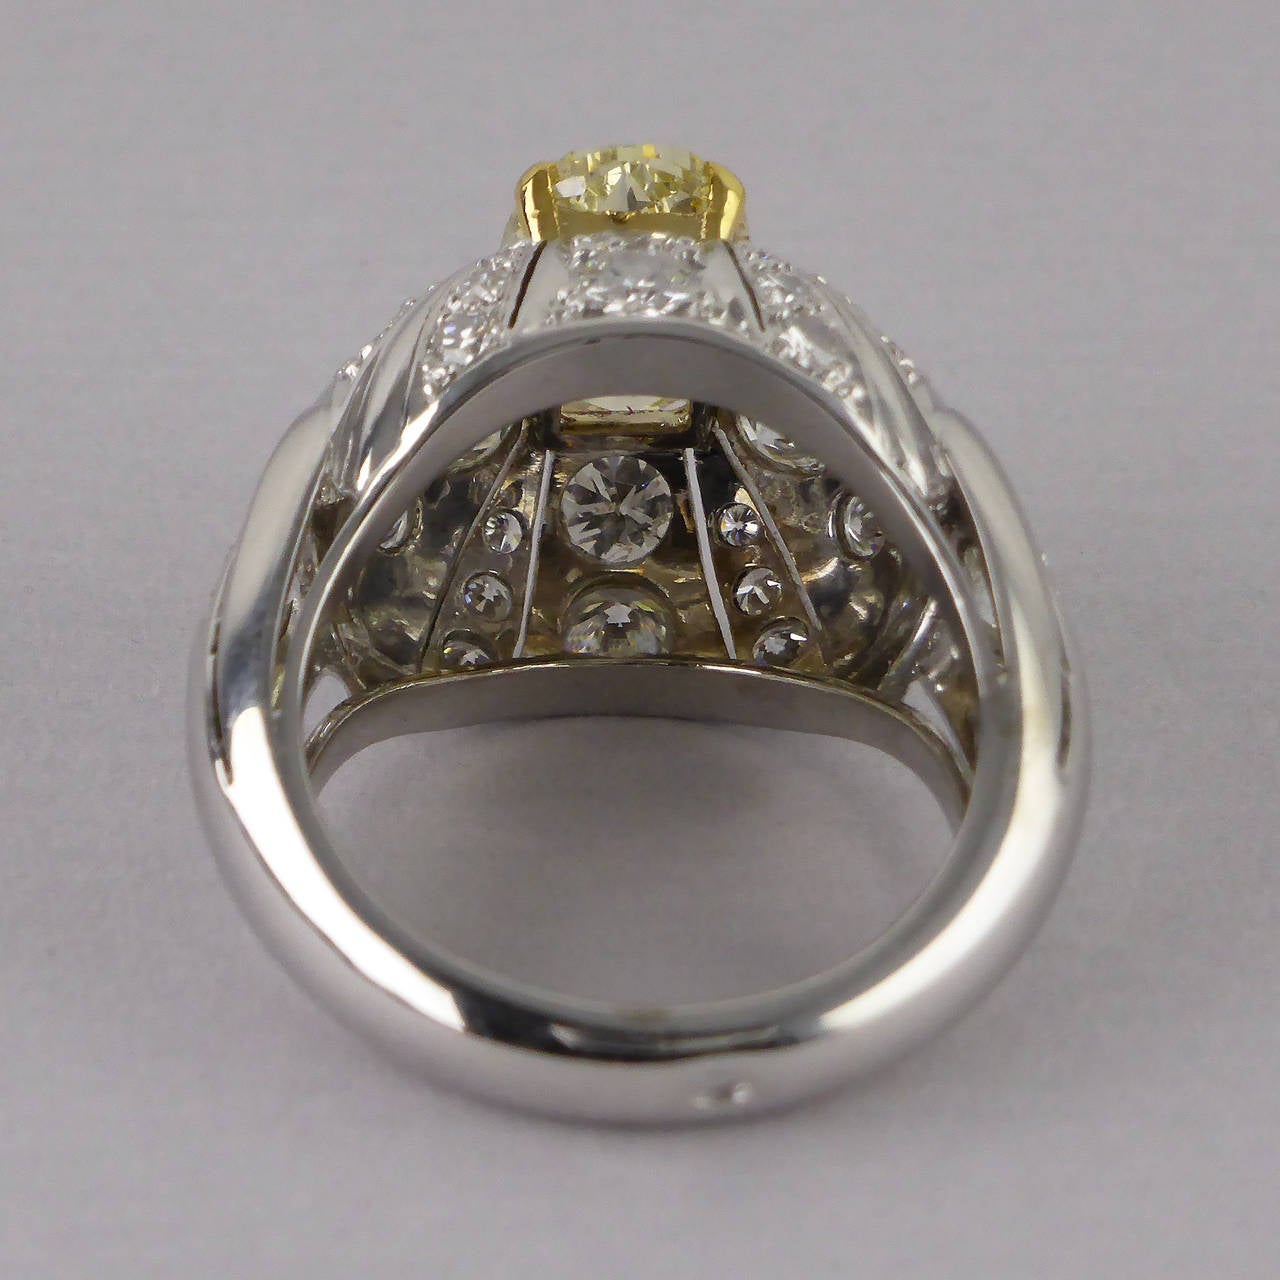 Oval Cut Certified Fancy Yellow Untreated Diamond 2.11 Carat Gold Bombe Ring, circa 1960